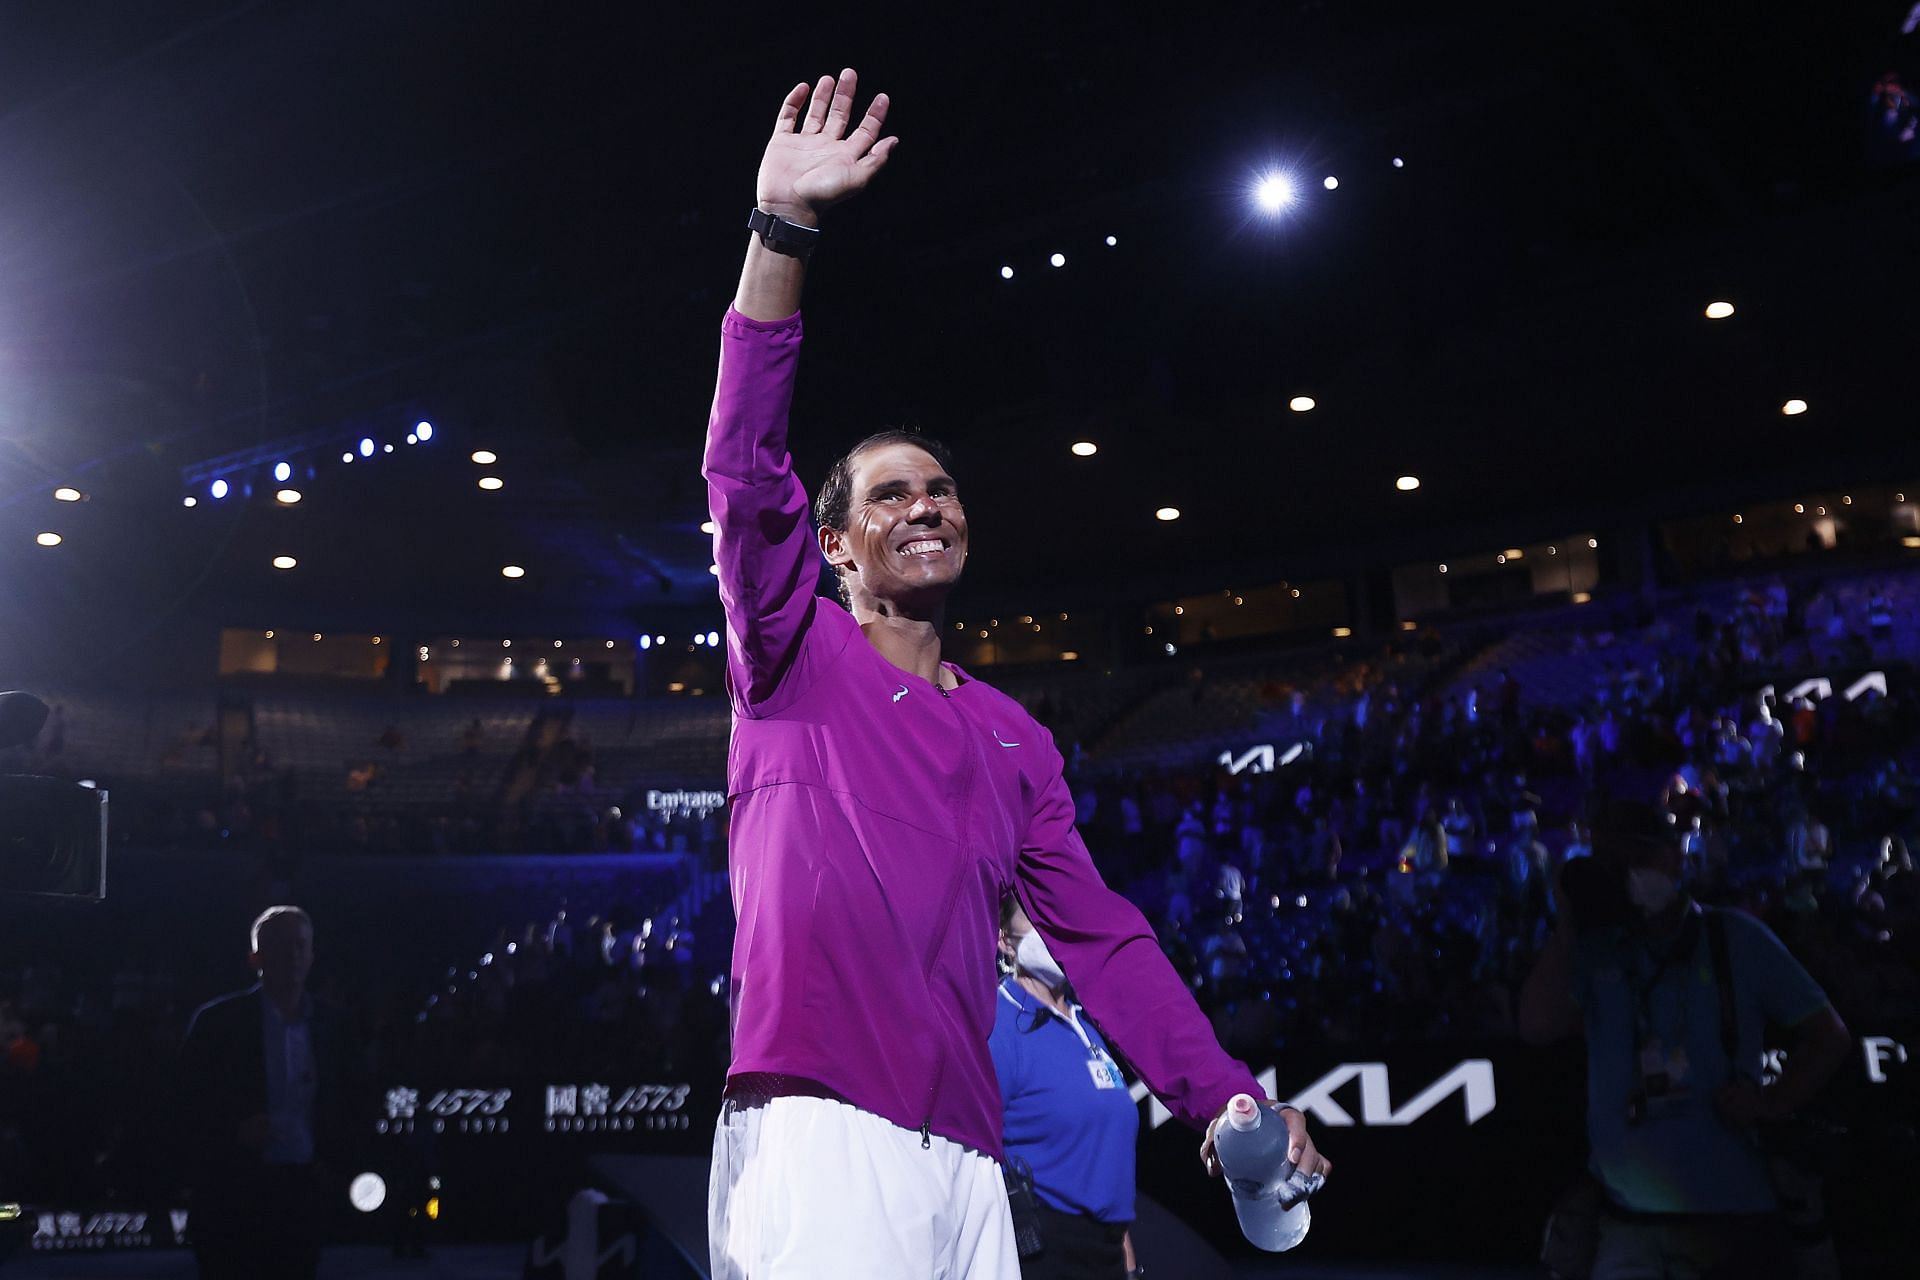 Iga Swiatek was in awe of how Rafael Nadal managed to outlast the younger Daniil Medvedev